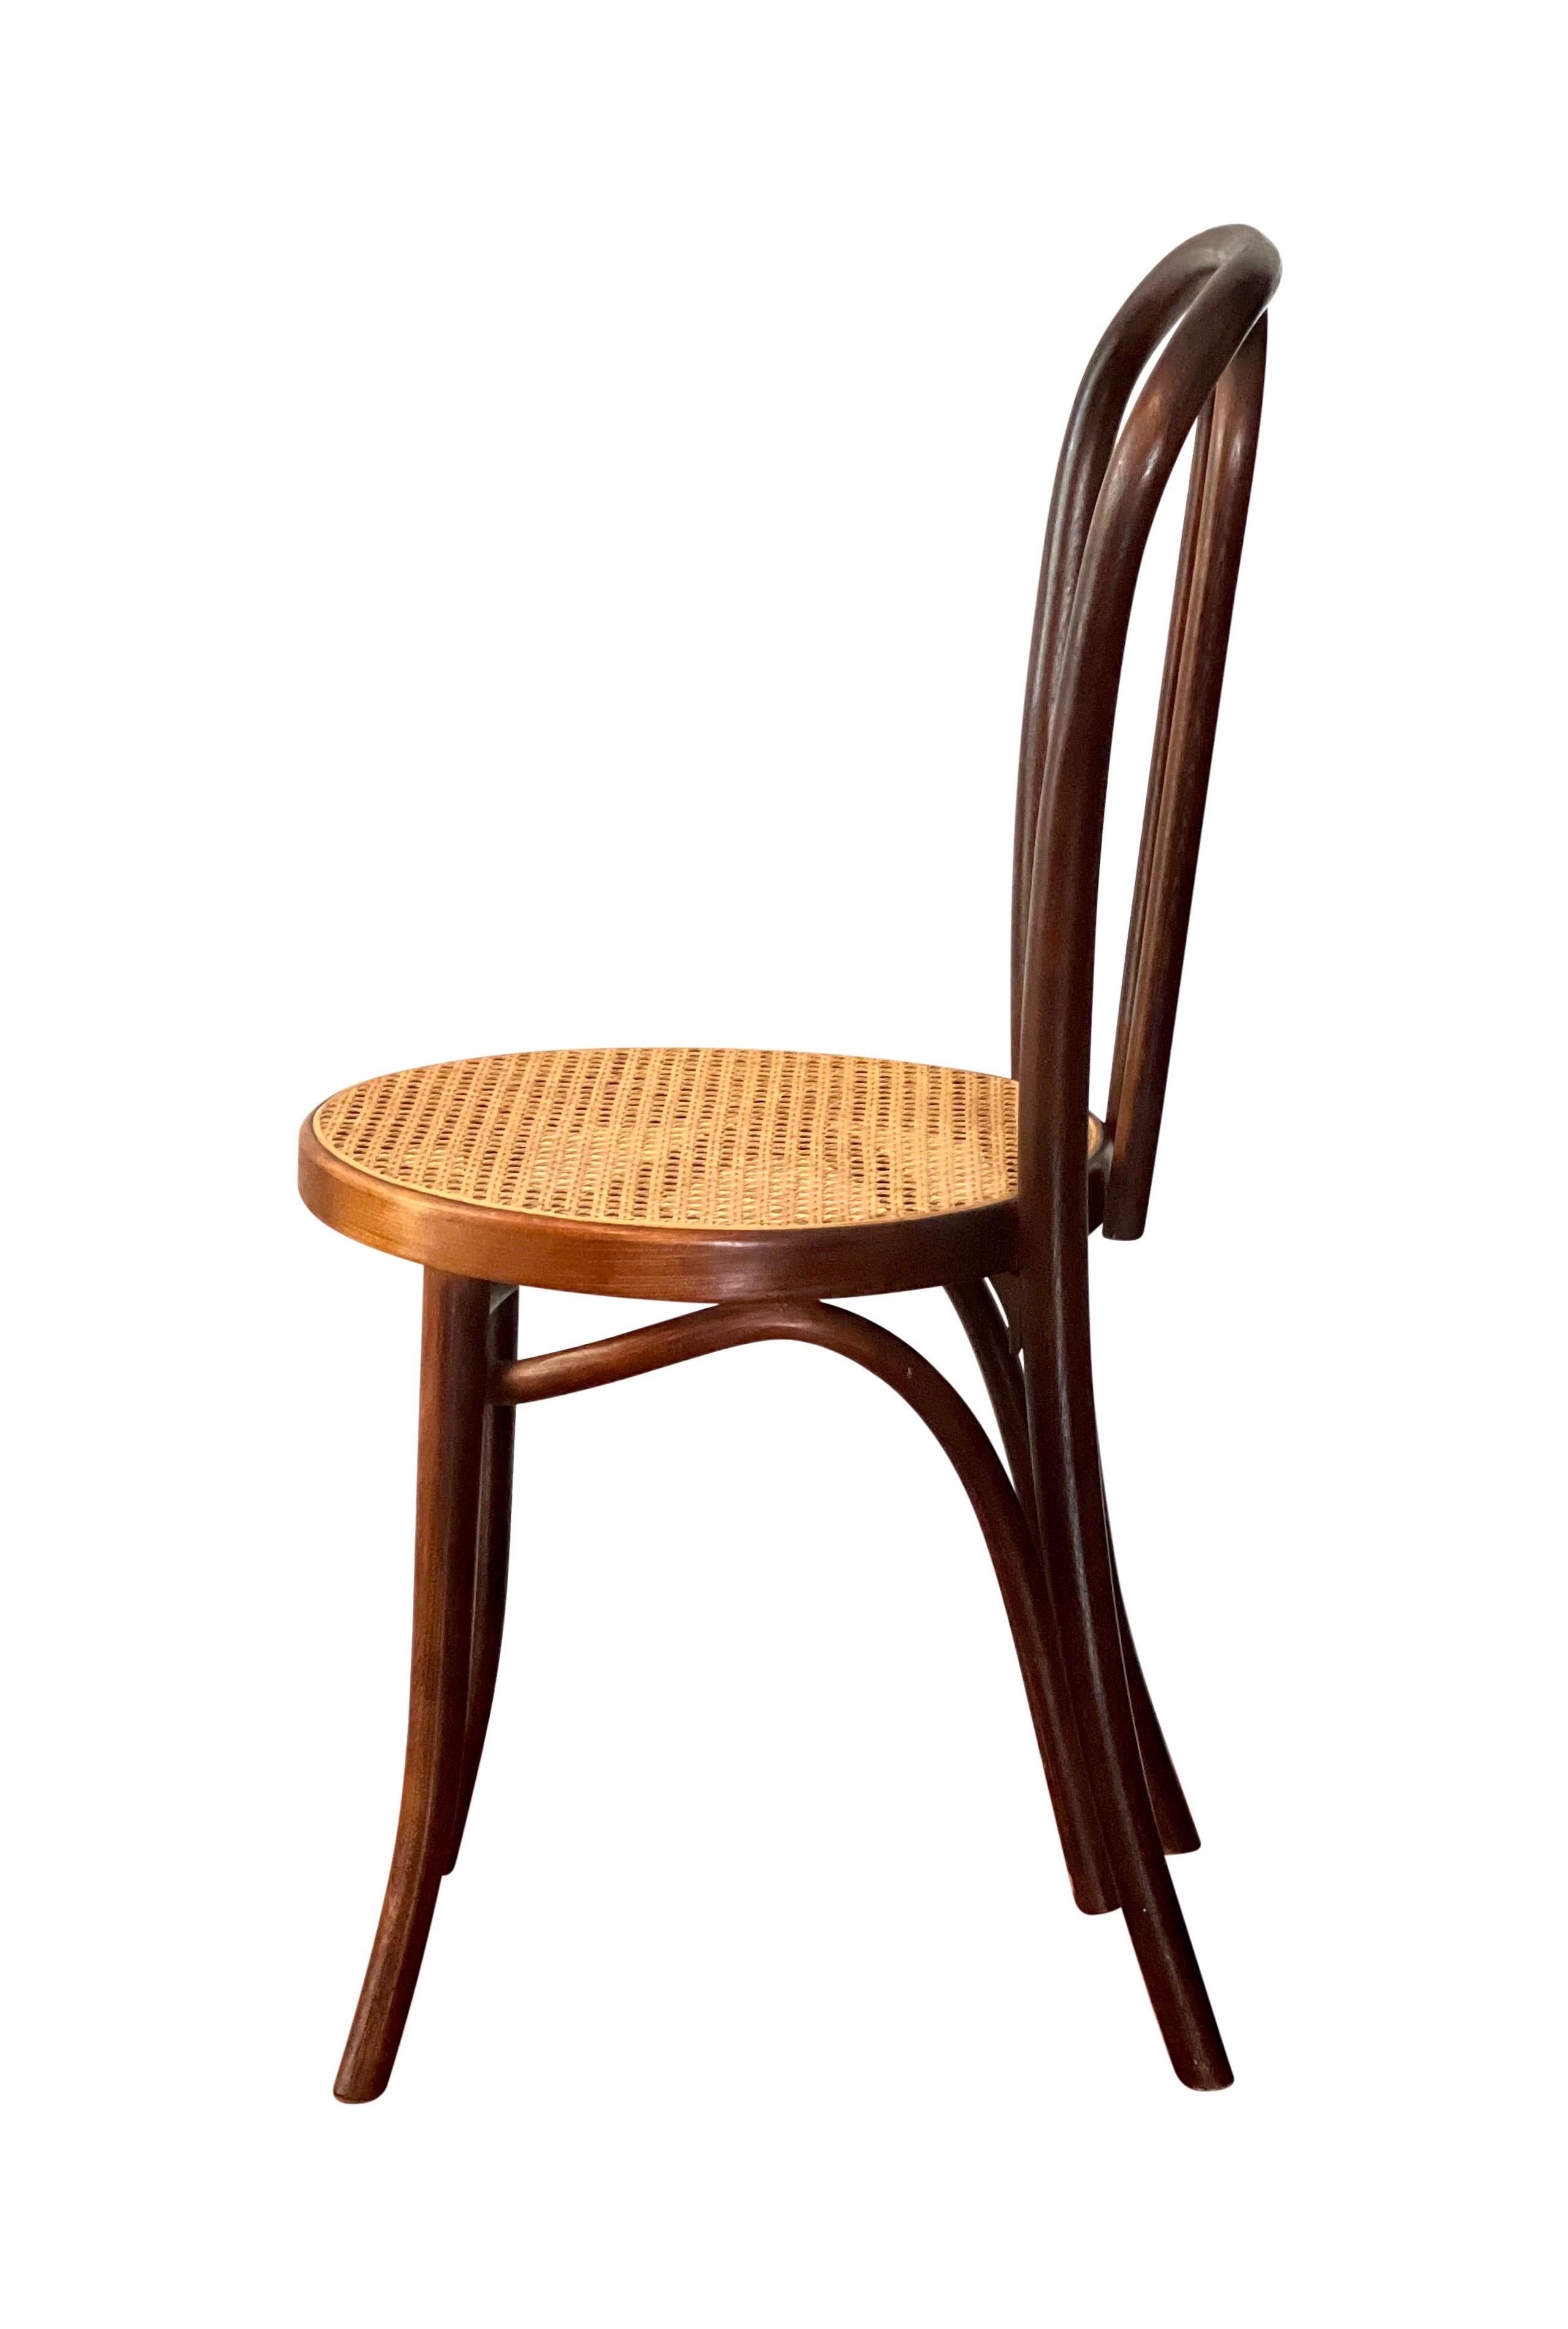 Thonet Bentwood Cane Bistro or Side Chair, 1920's In Good Condition For Sale In Doylestown, PA